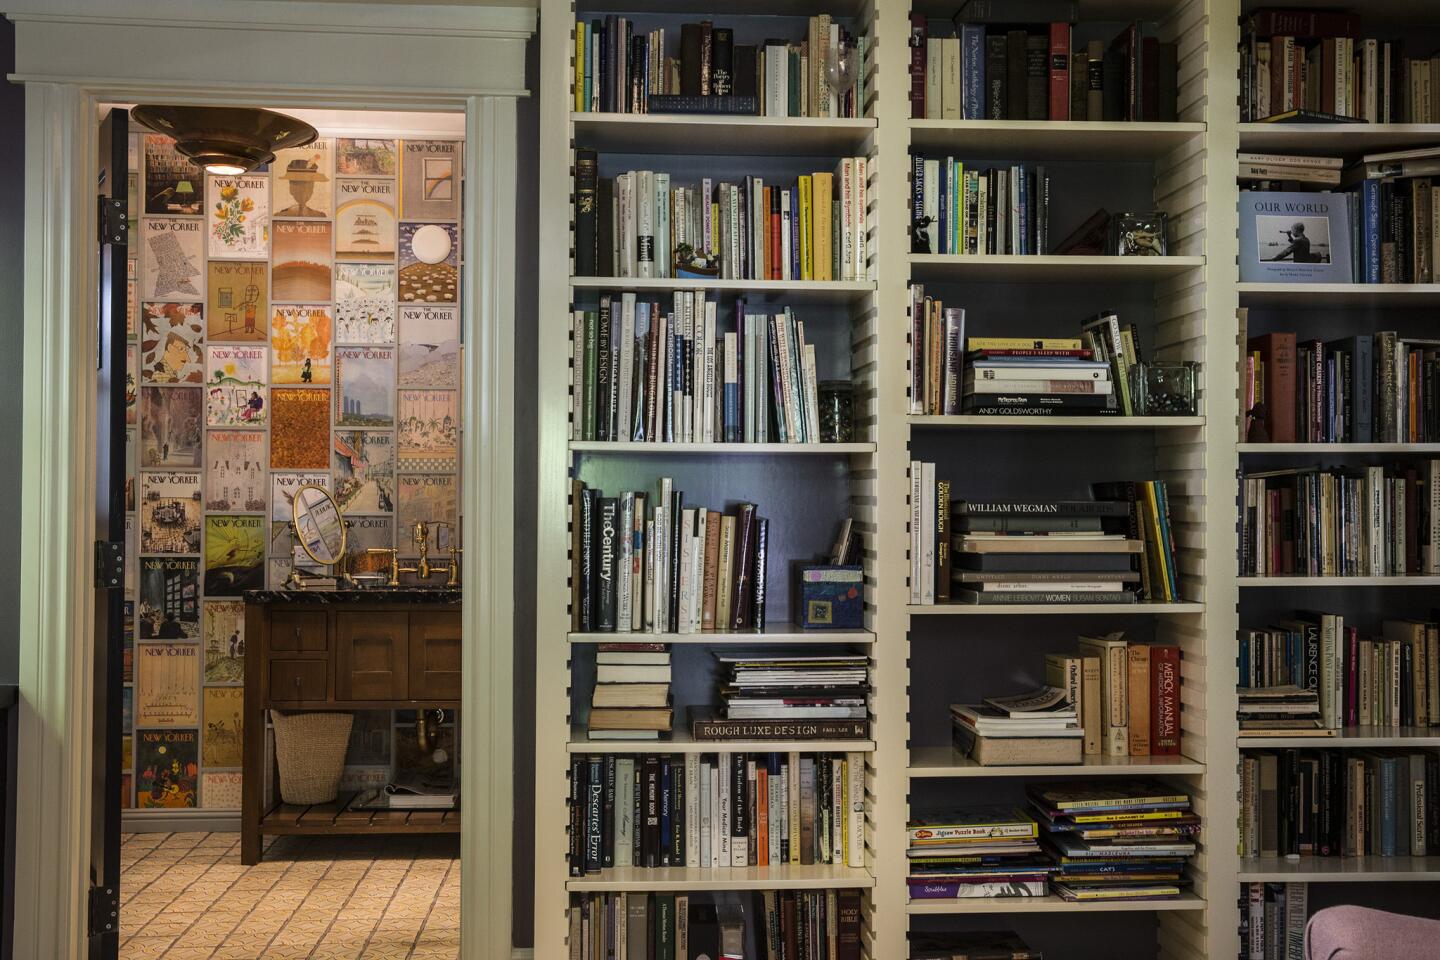 Custom bookshelves line the walls of Linda Hunt and Karen Klein's library. The bathroom to the left is lined with vintage New Yorker covers from Hunt's collection.